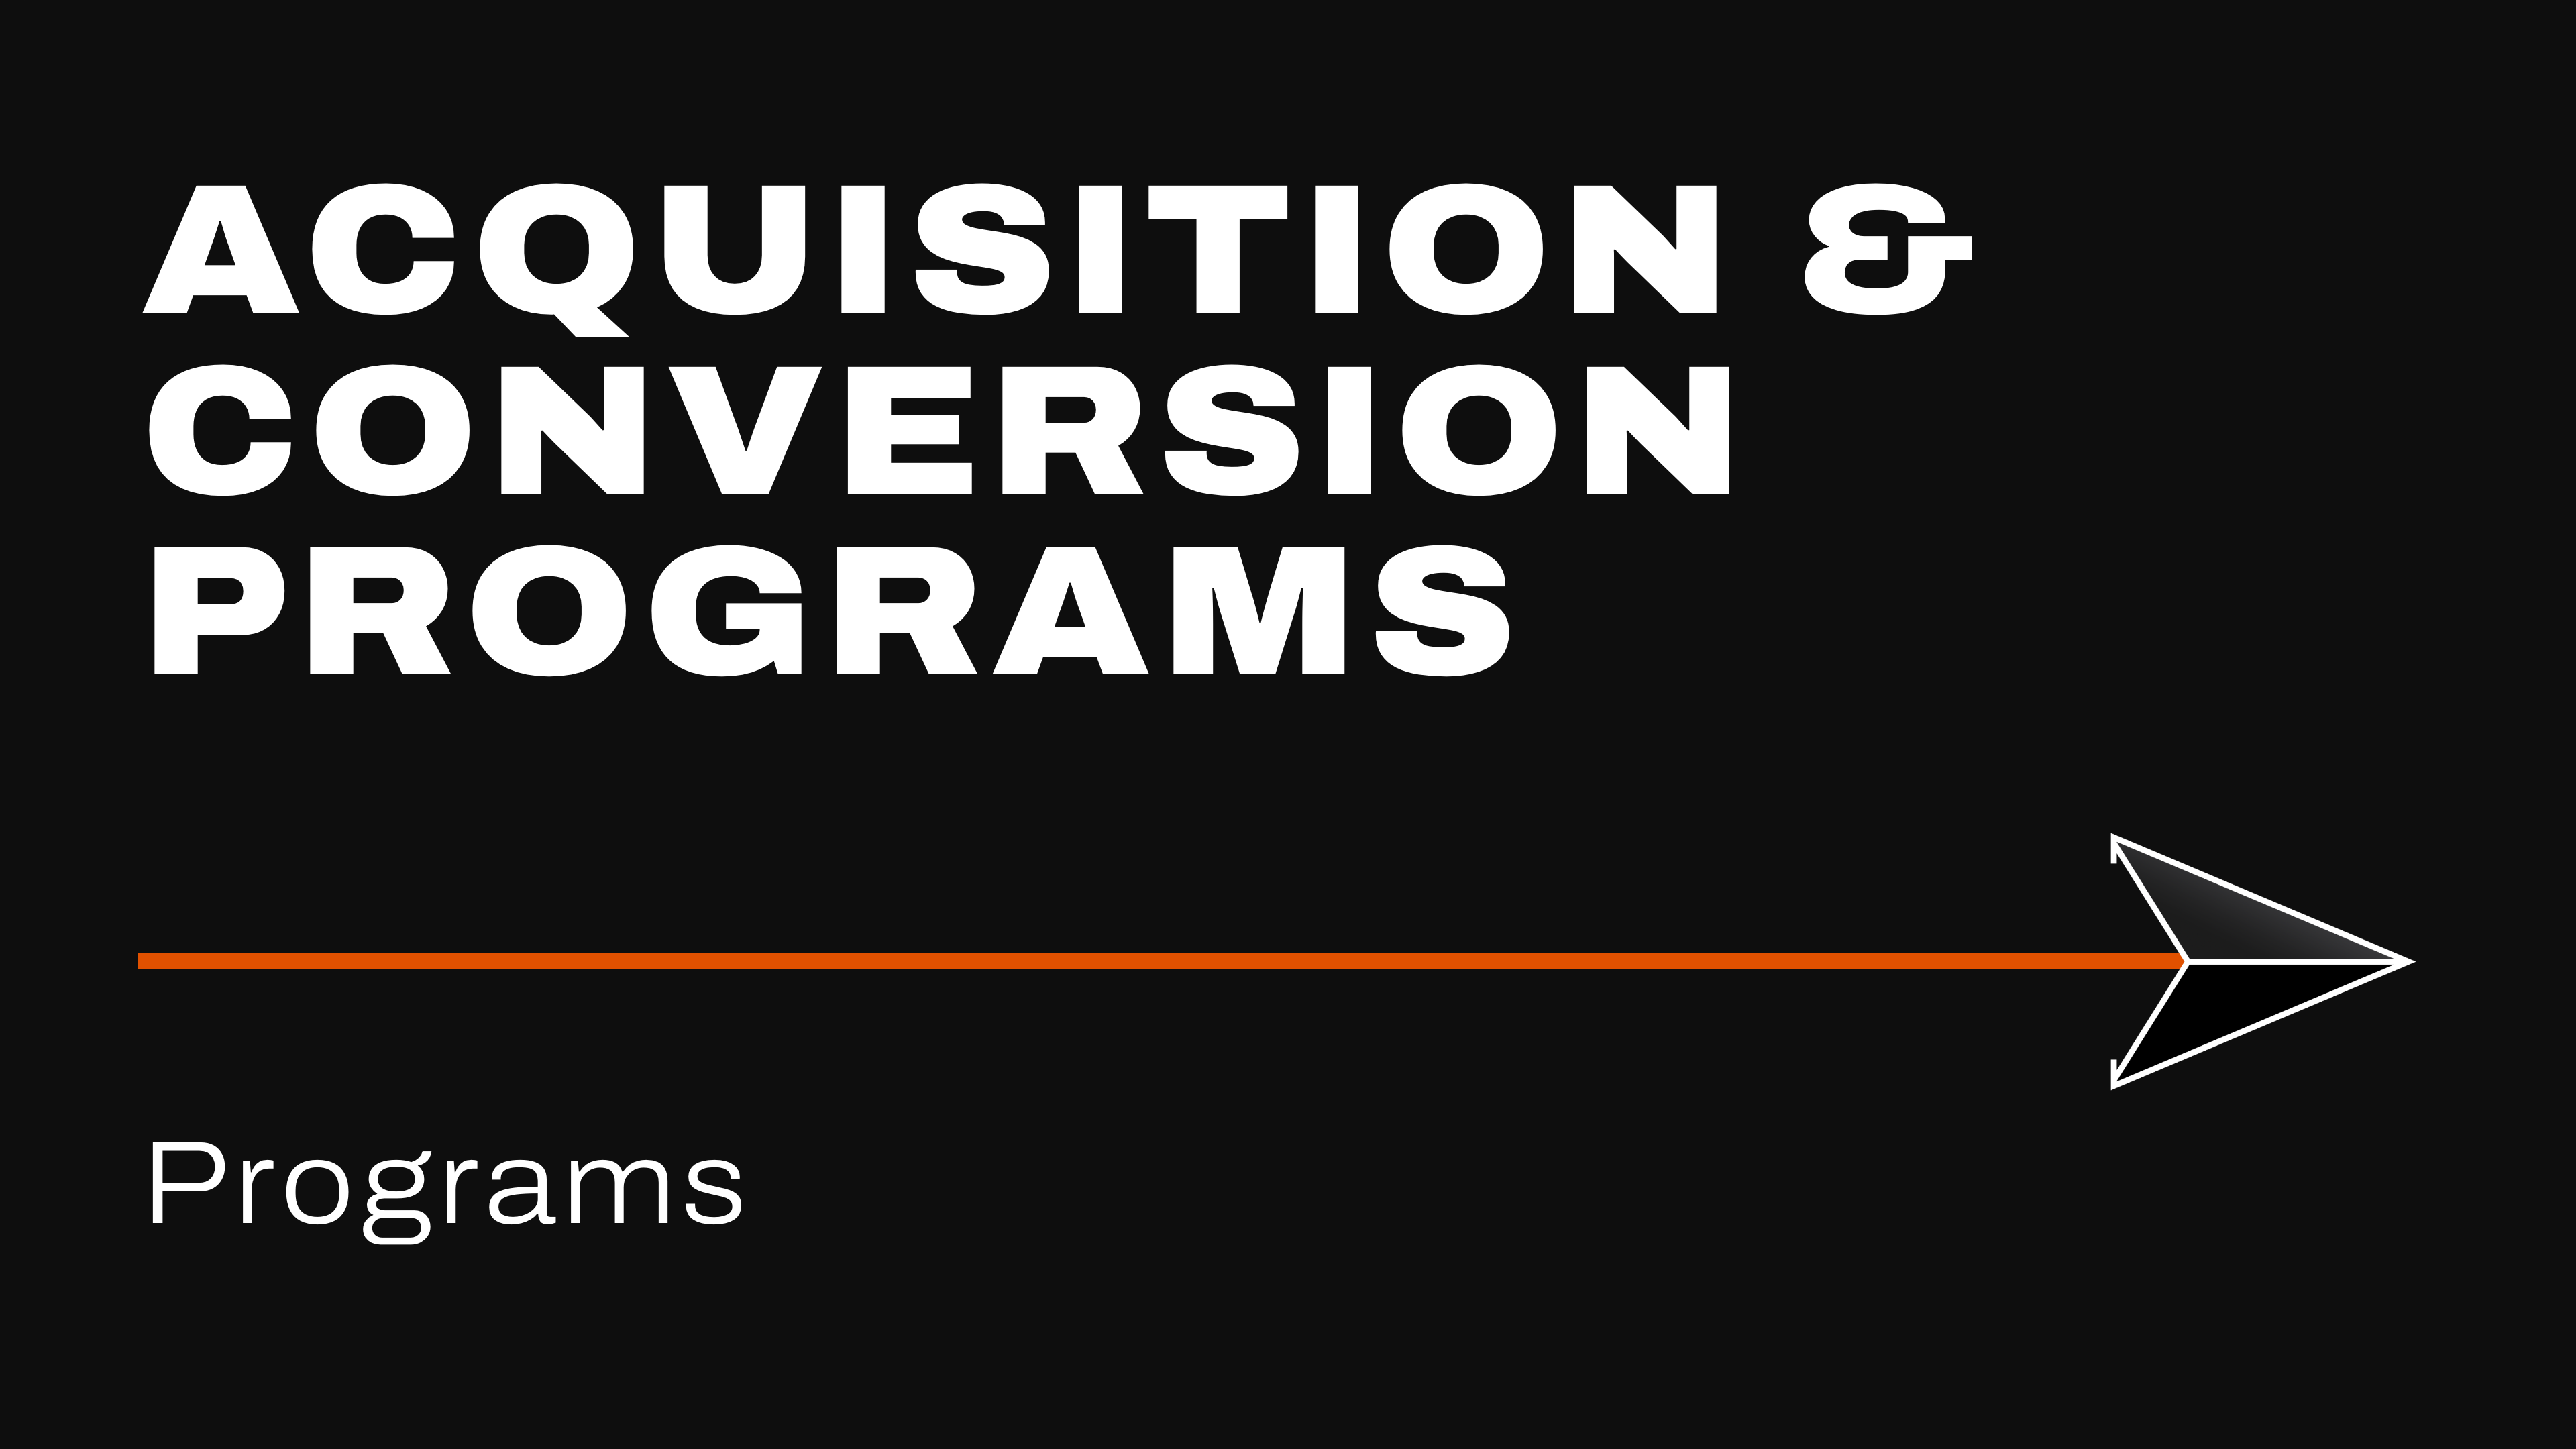 Acquisition and Conversion Programs